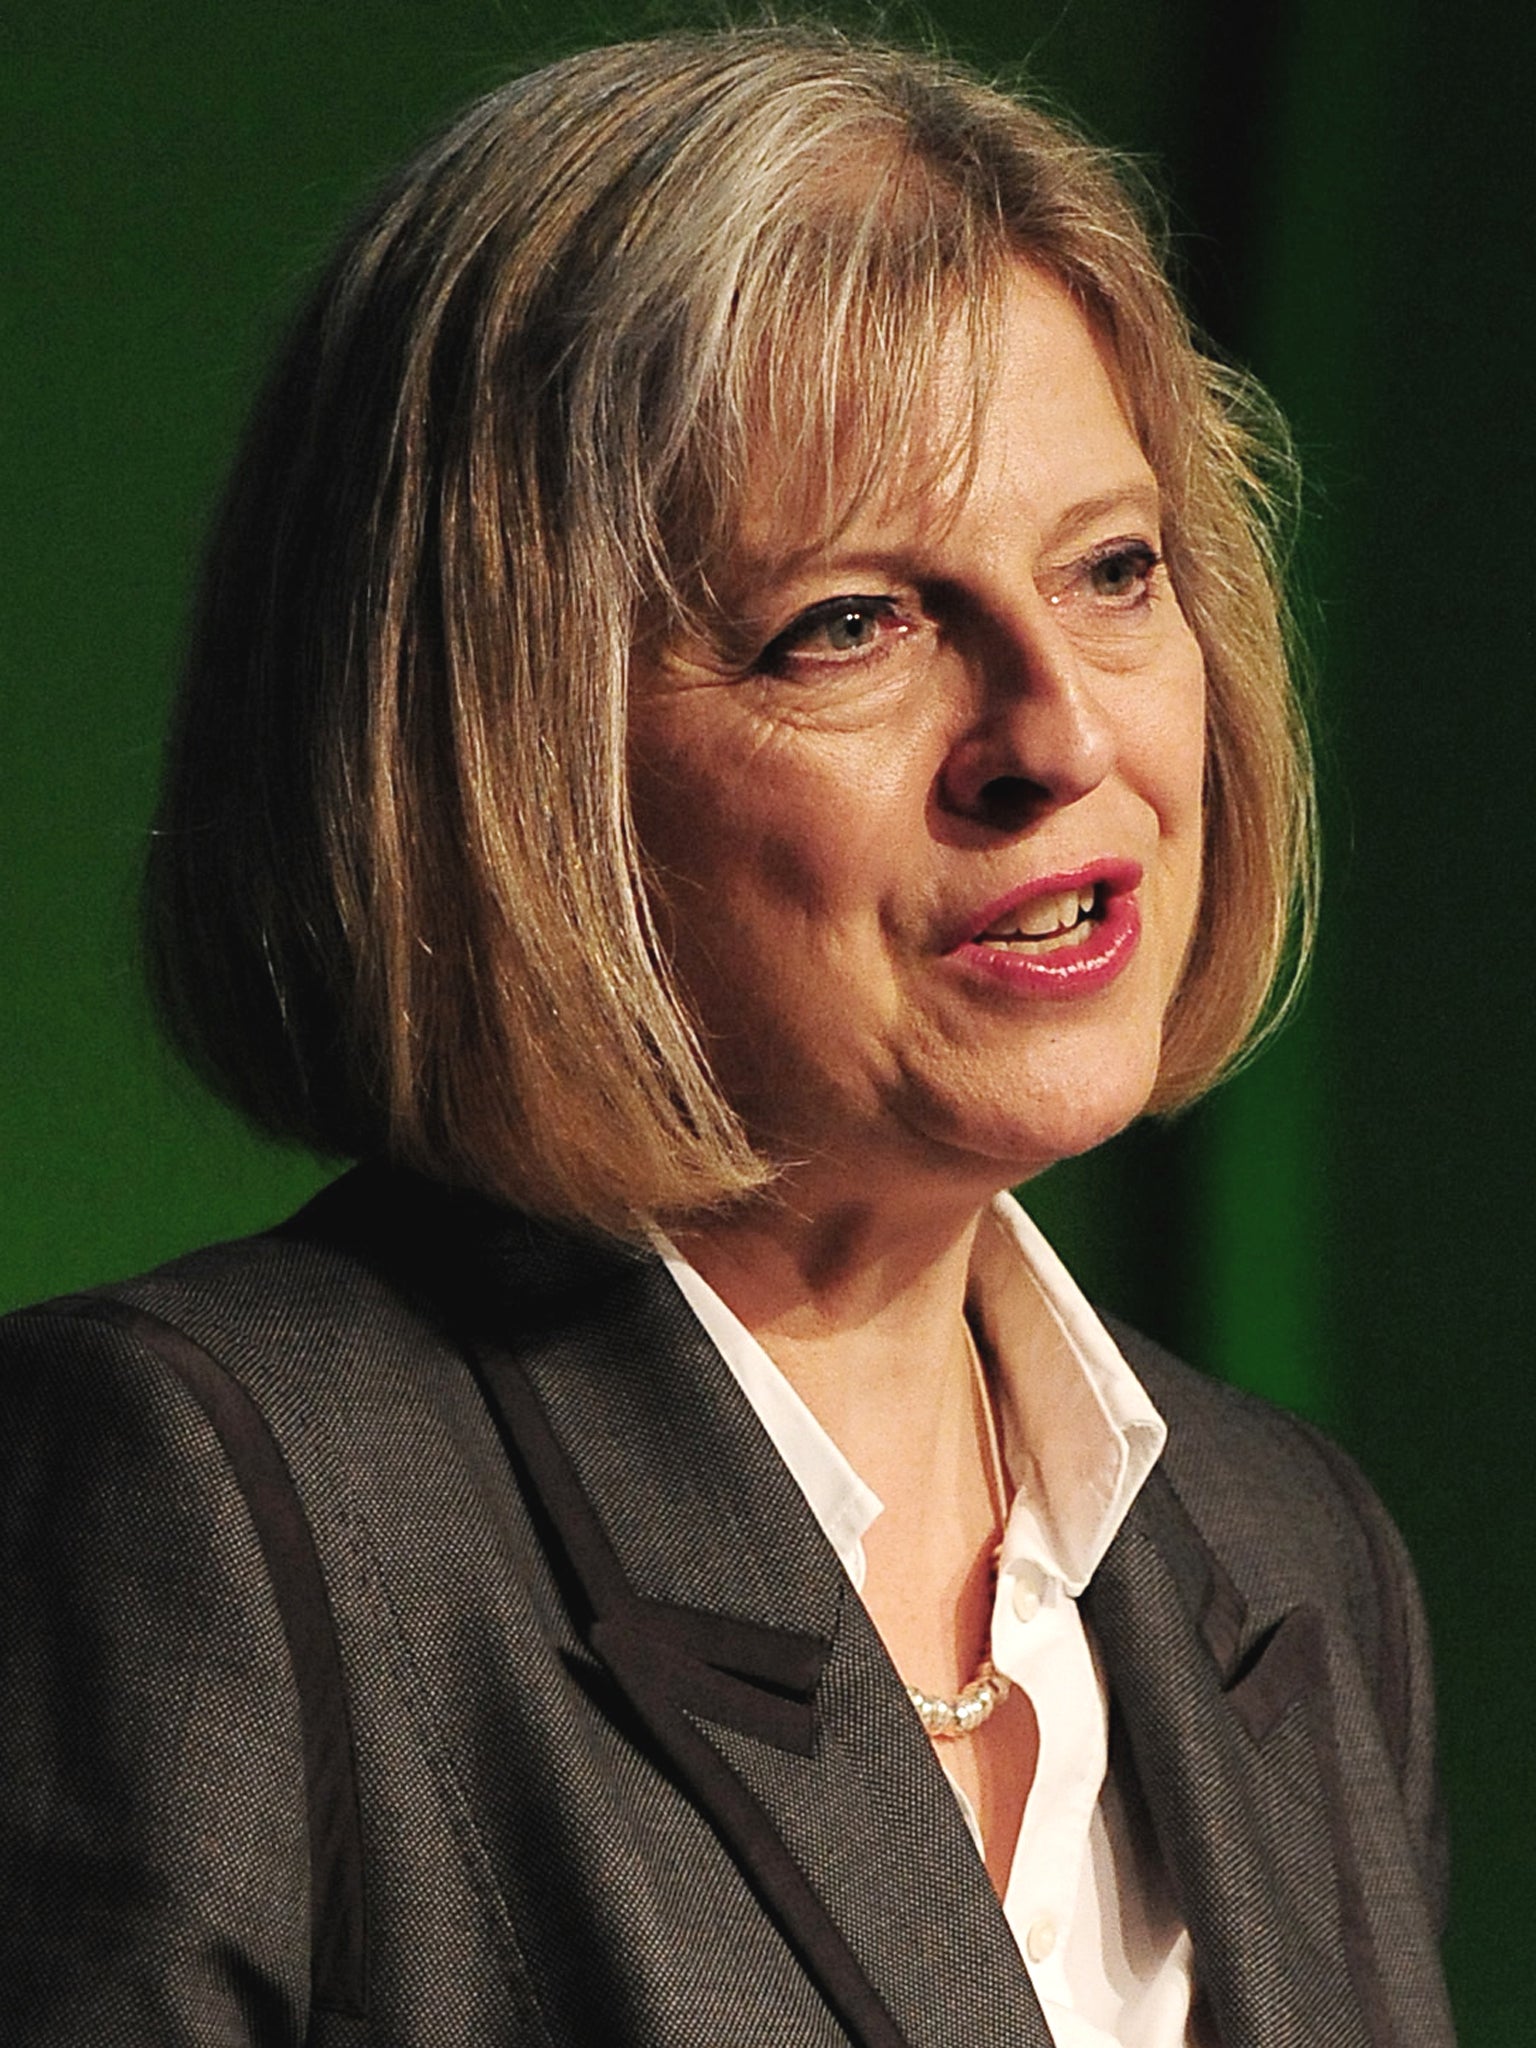 Theresa May: 'I don’t think the Government should tell women, what they should be wearing'